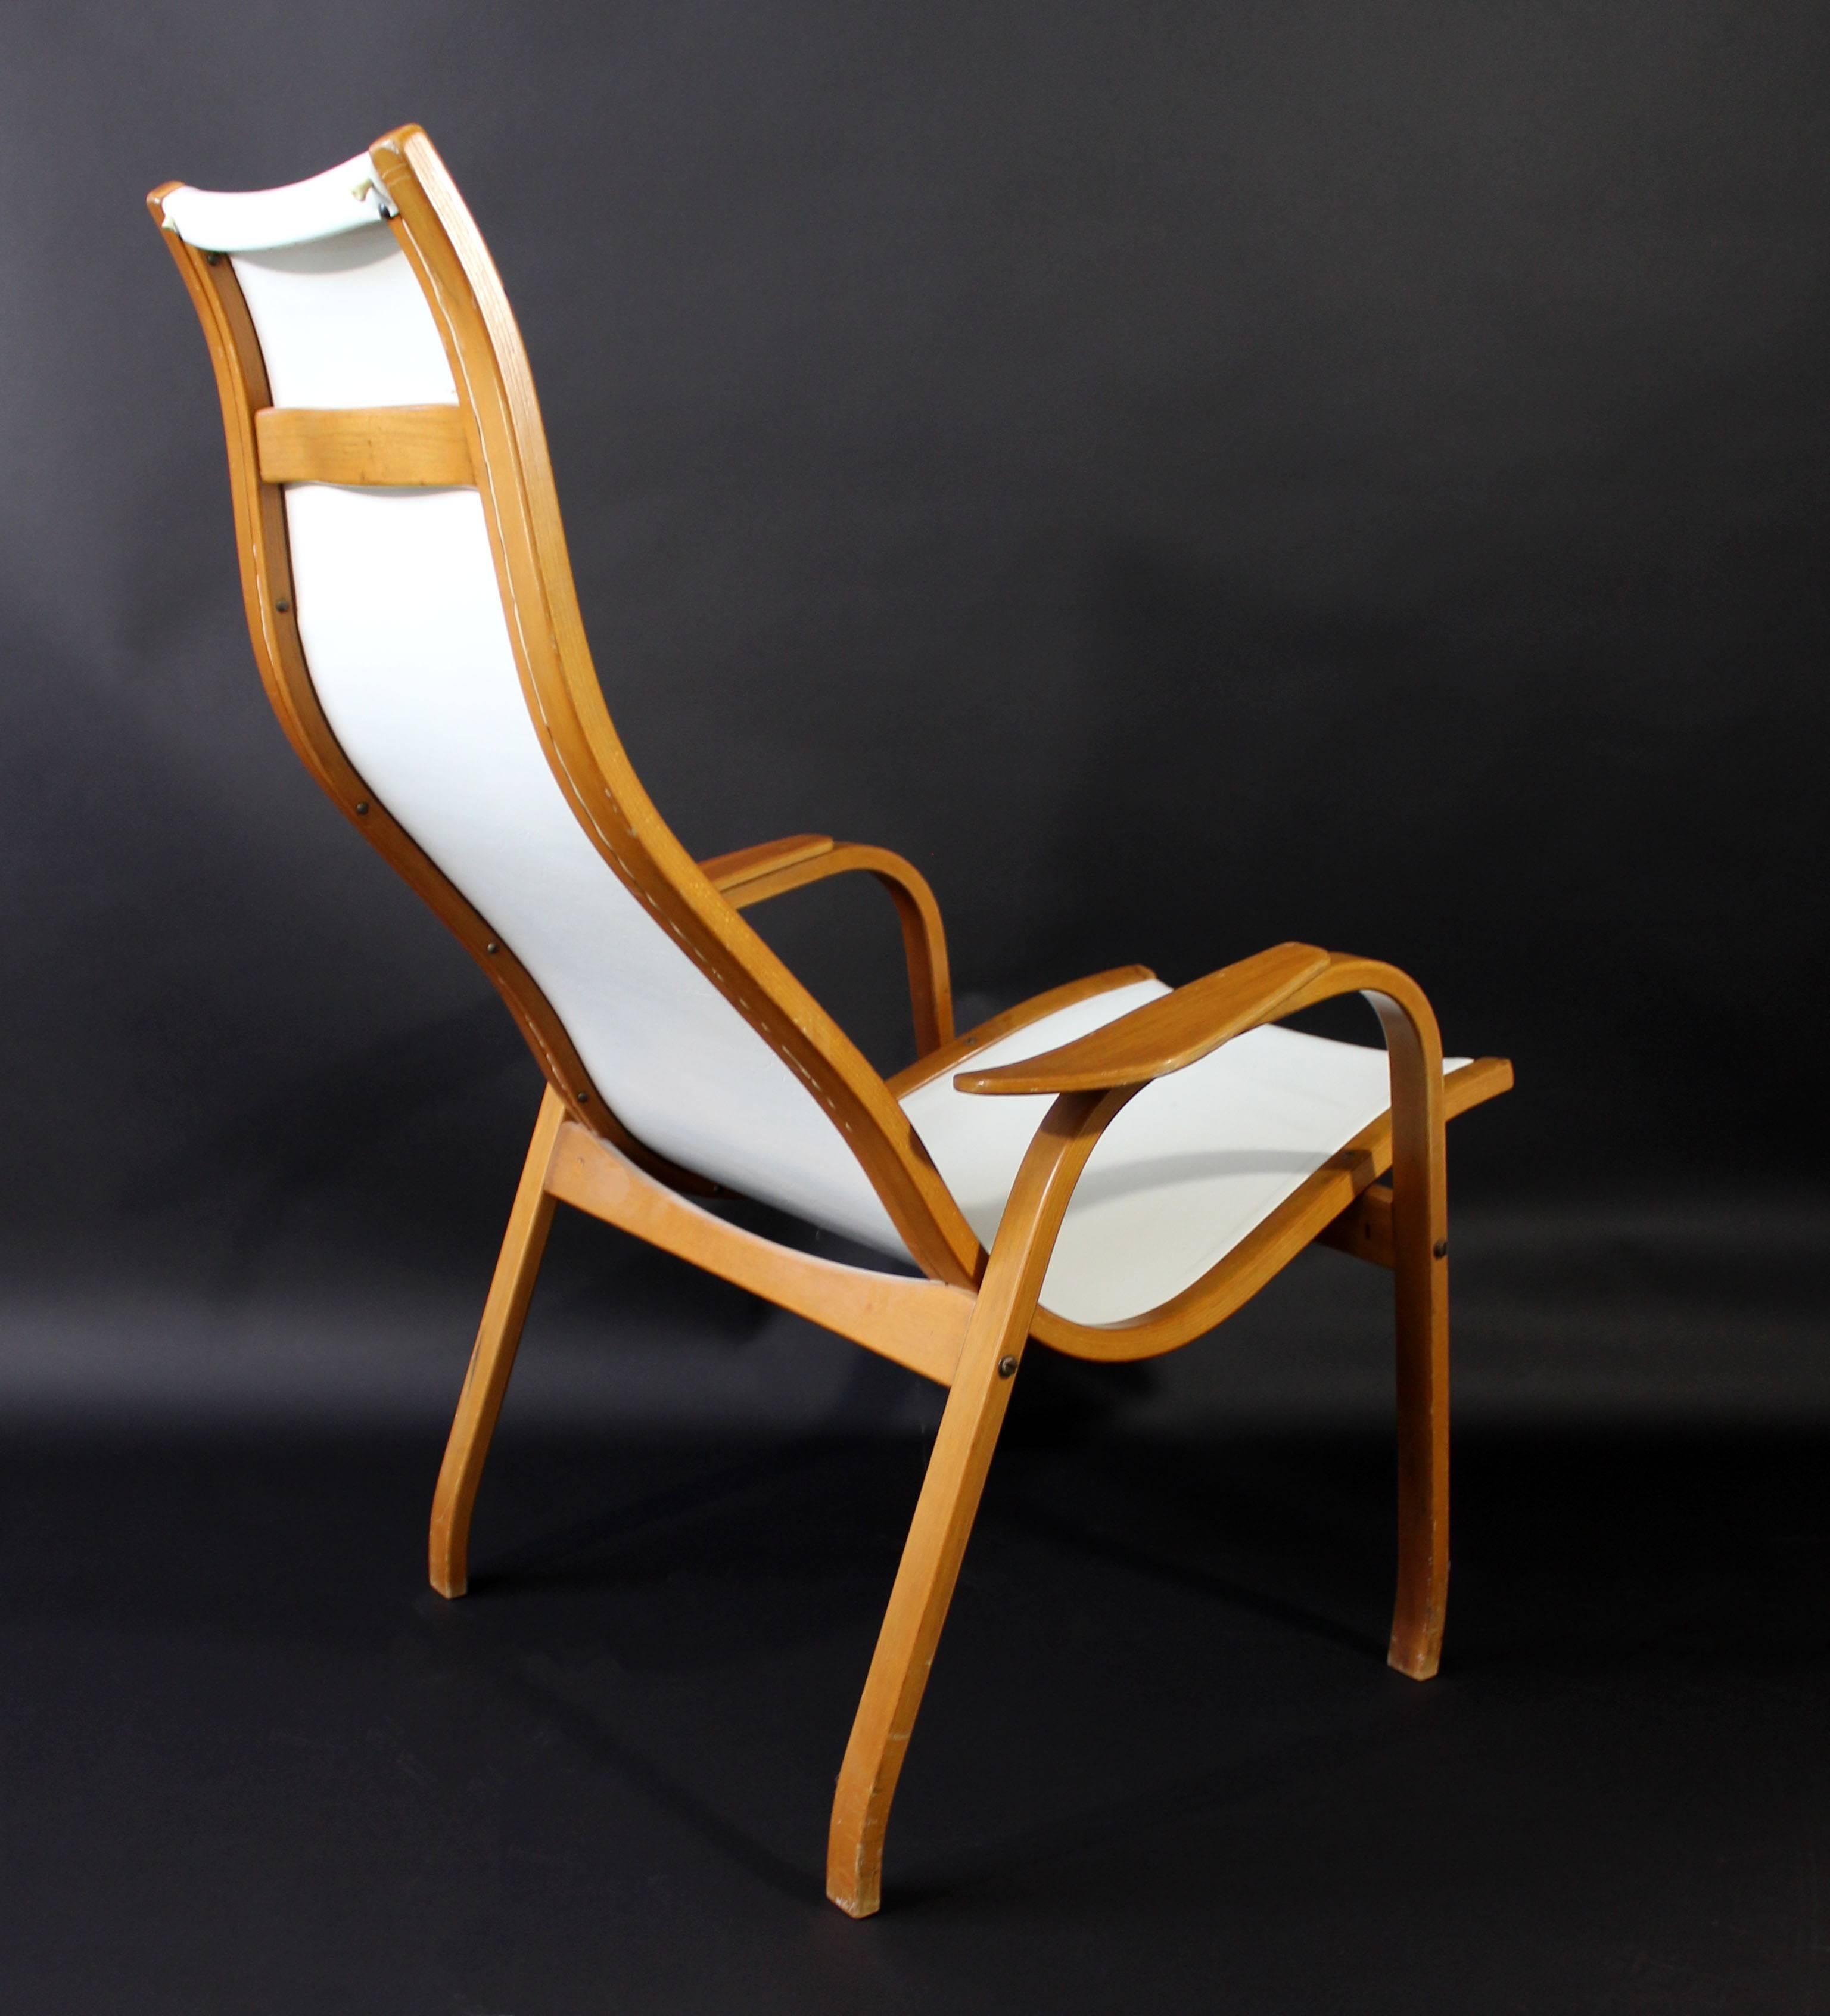 Mid-20th Century Mid-Century Modern White Vinyl Lamino Bentwood Chair Made in Sweden, 1950s